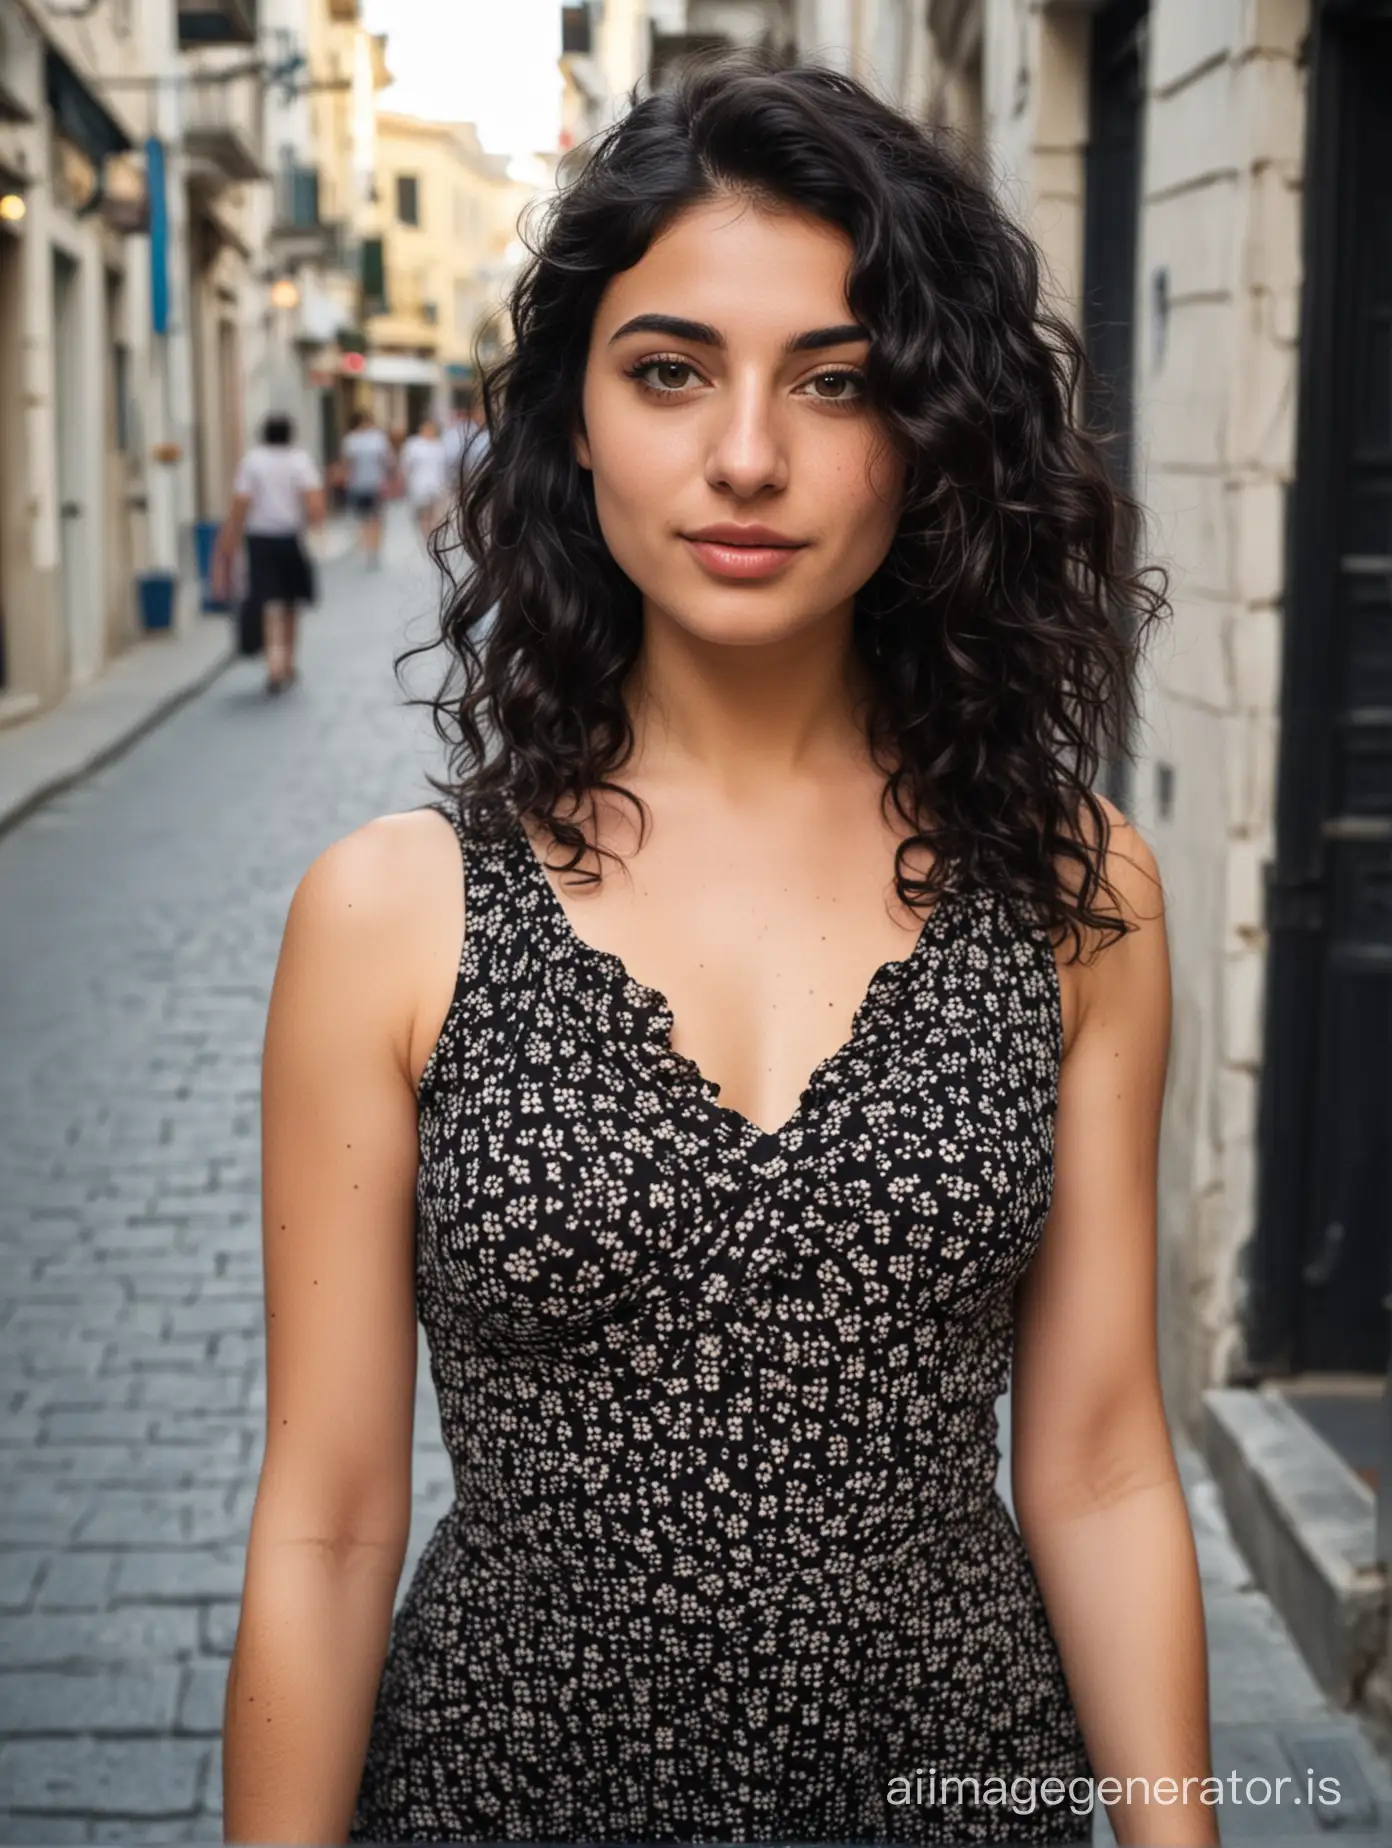 Greek-Street-Portrait-Andriana-a-22YearOld-Greek-Woman-with-Wavy-Black-Hair-and-Unique-Features